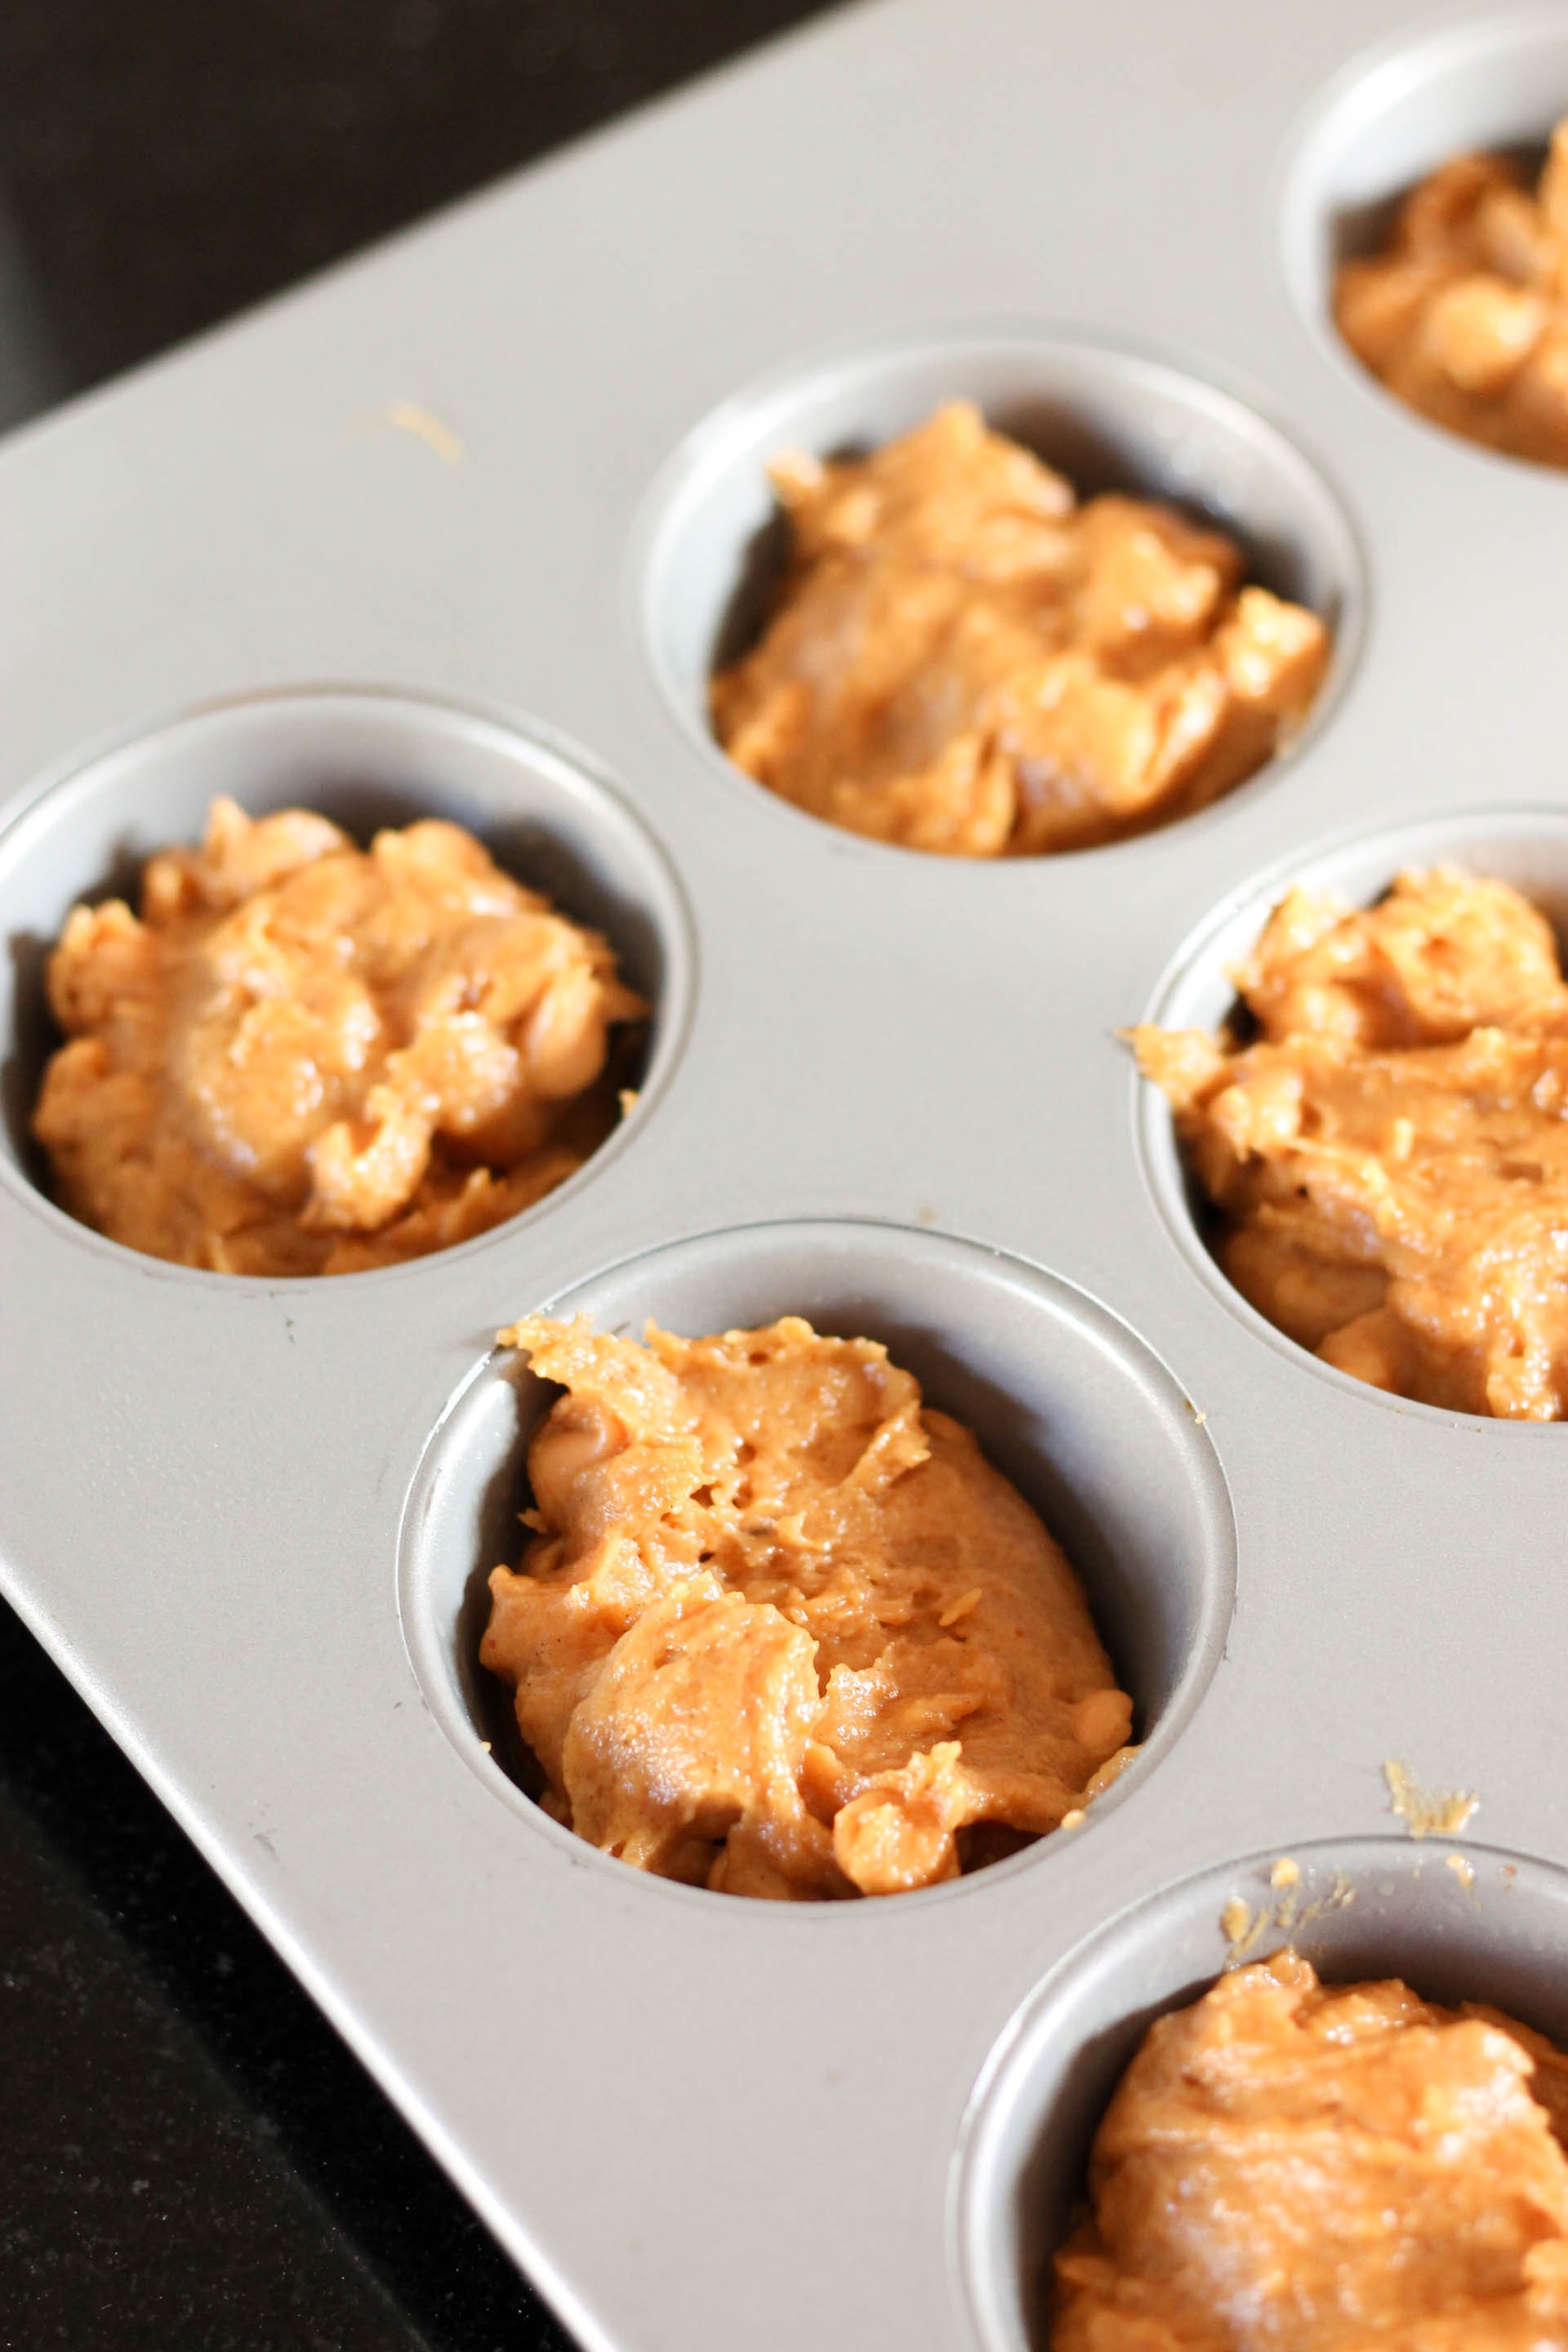 Butterscotch chips added and spooned into a muffin tin.